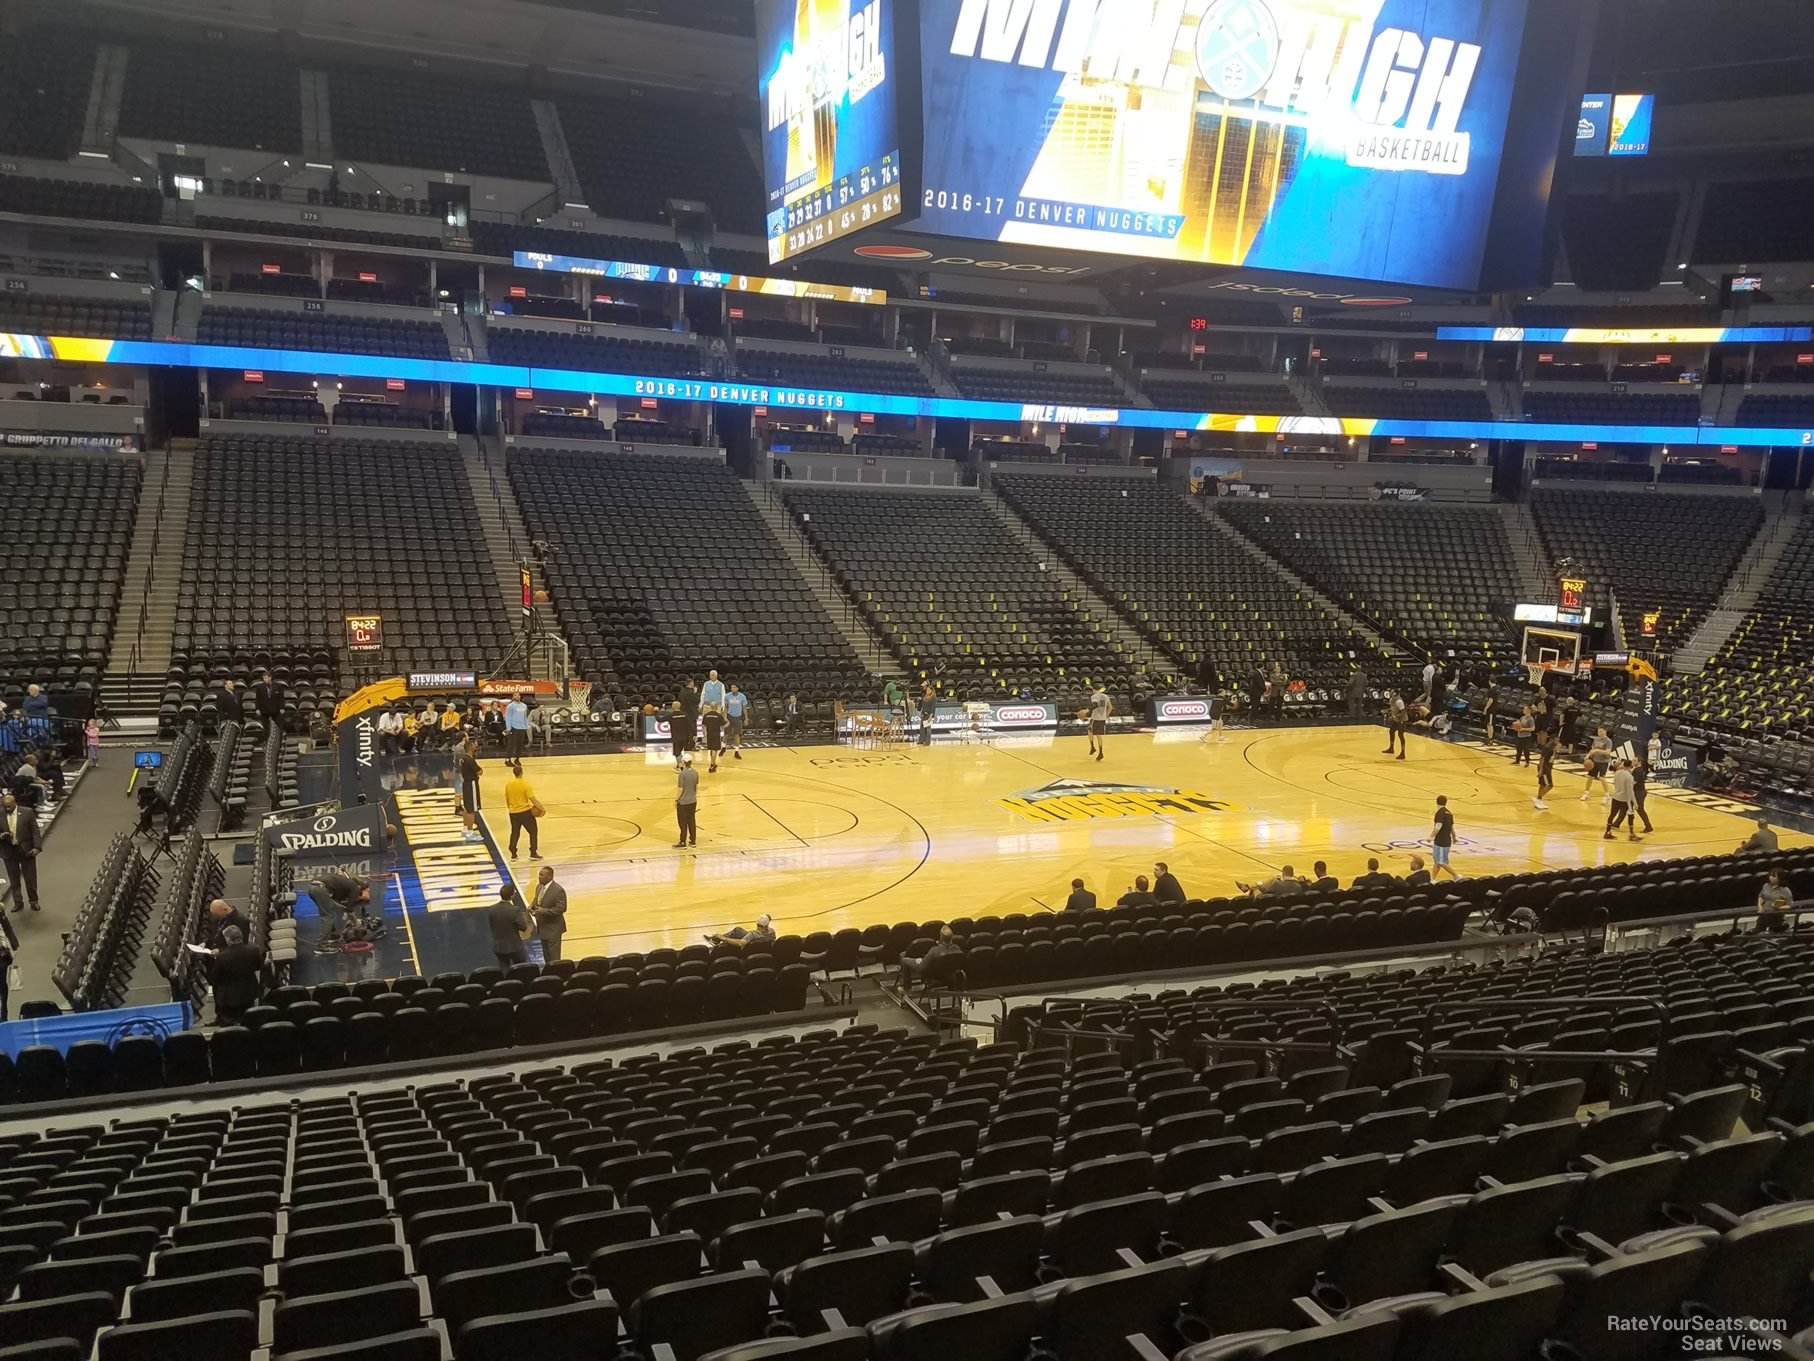 section 128, row 19 seat view  for basketball - ball arena